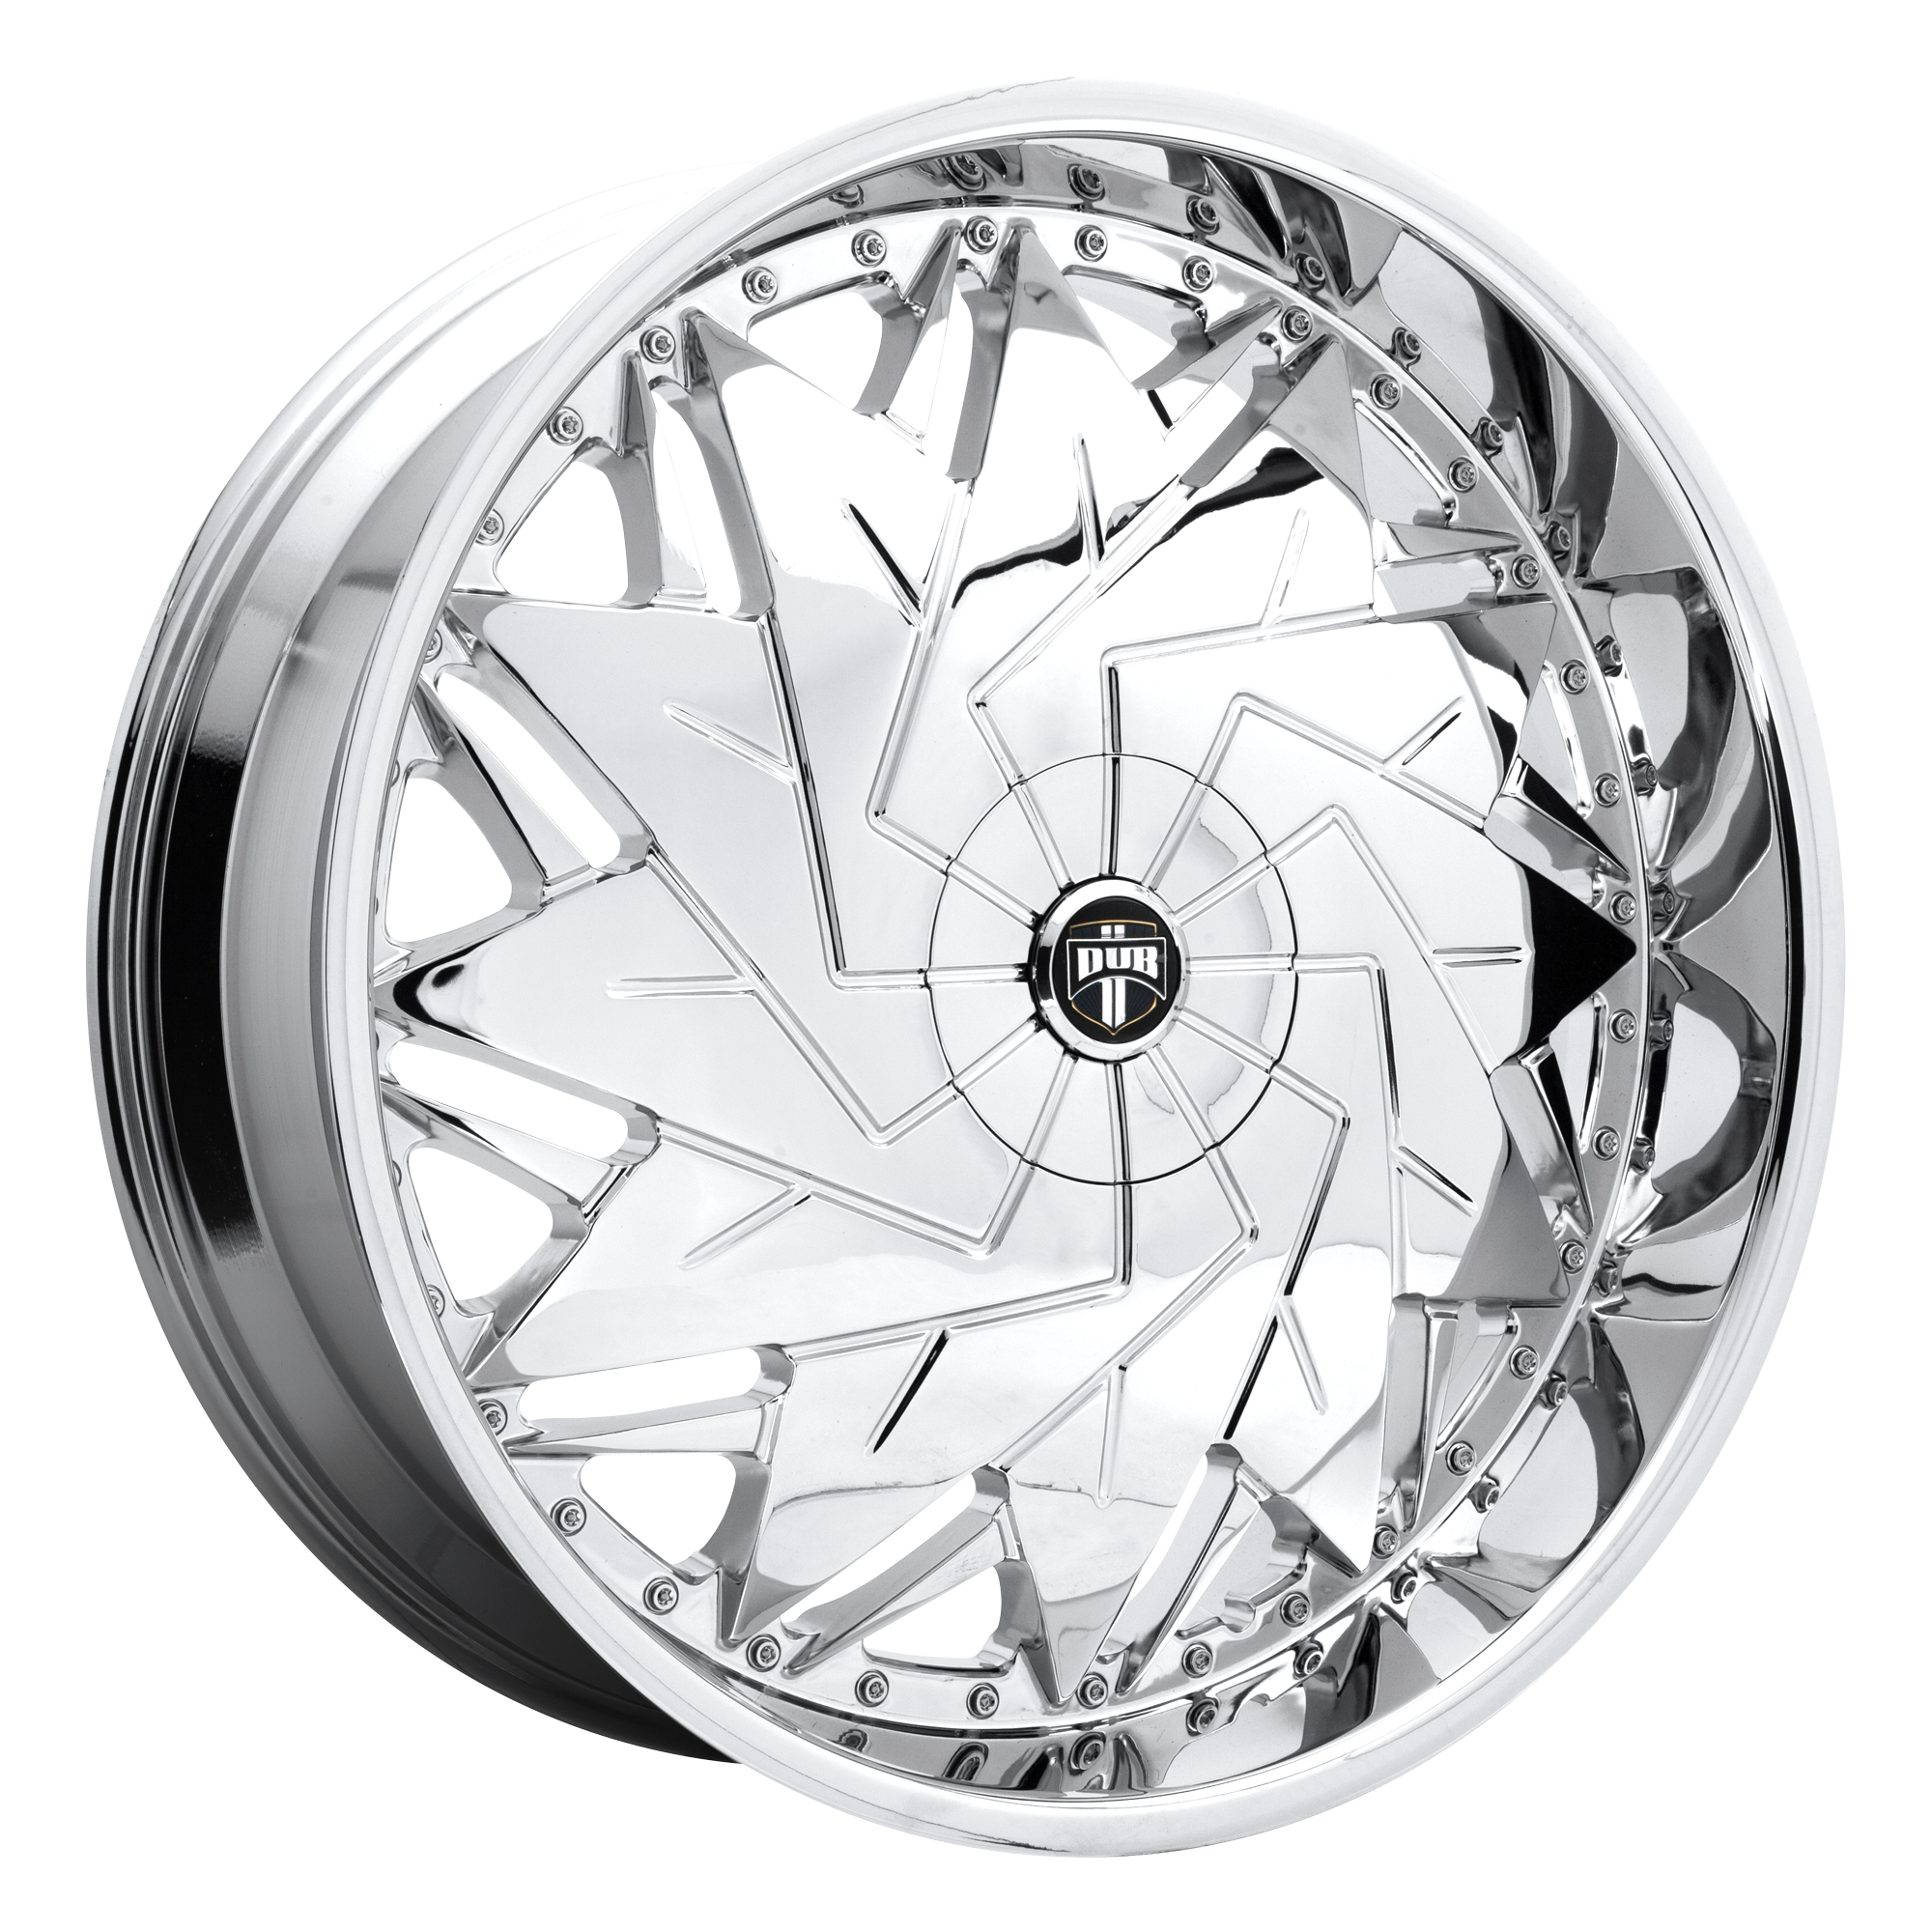 DAZR 26x10 5x115.00/5x120.00 CHROME PLATED (5 mm) - Tires and Engine Performance